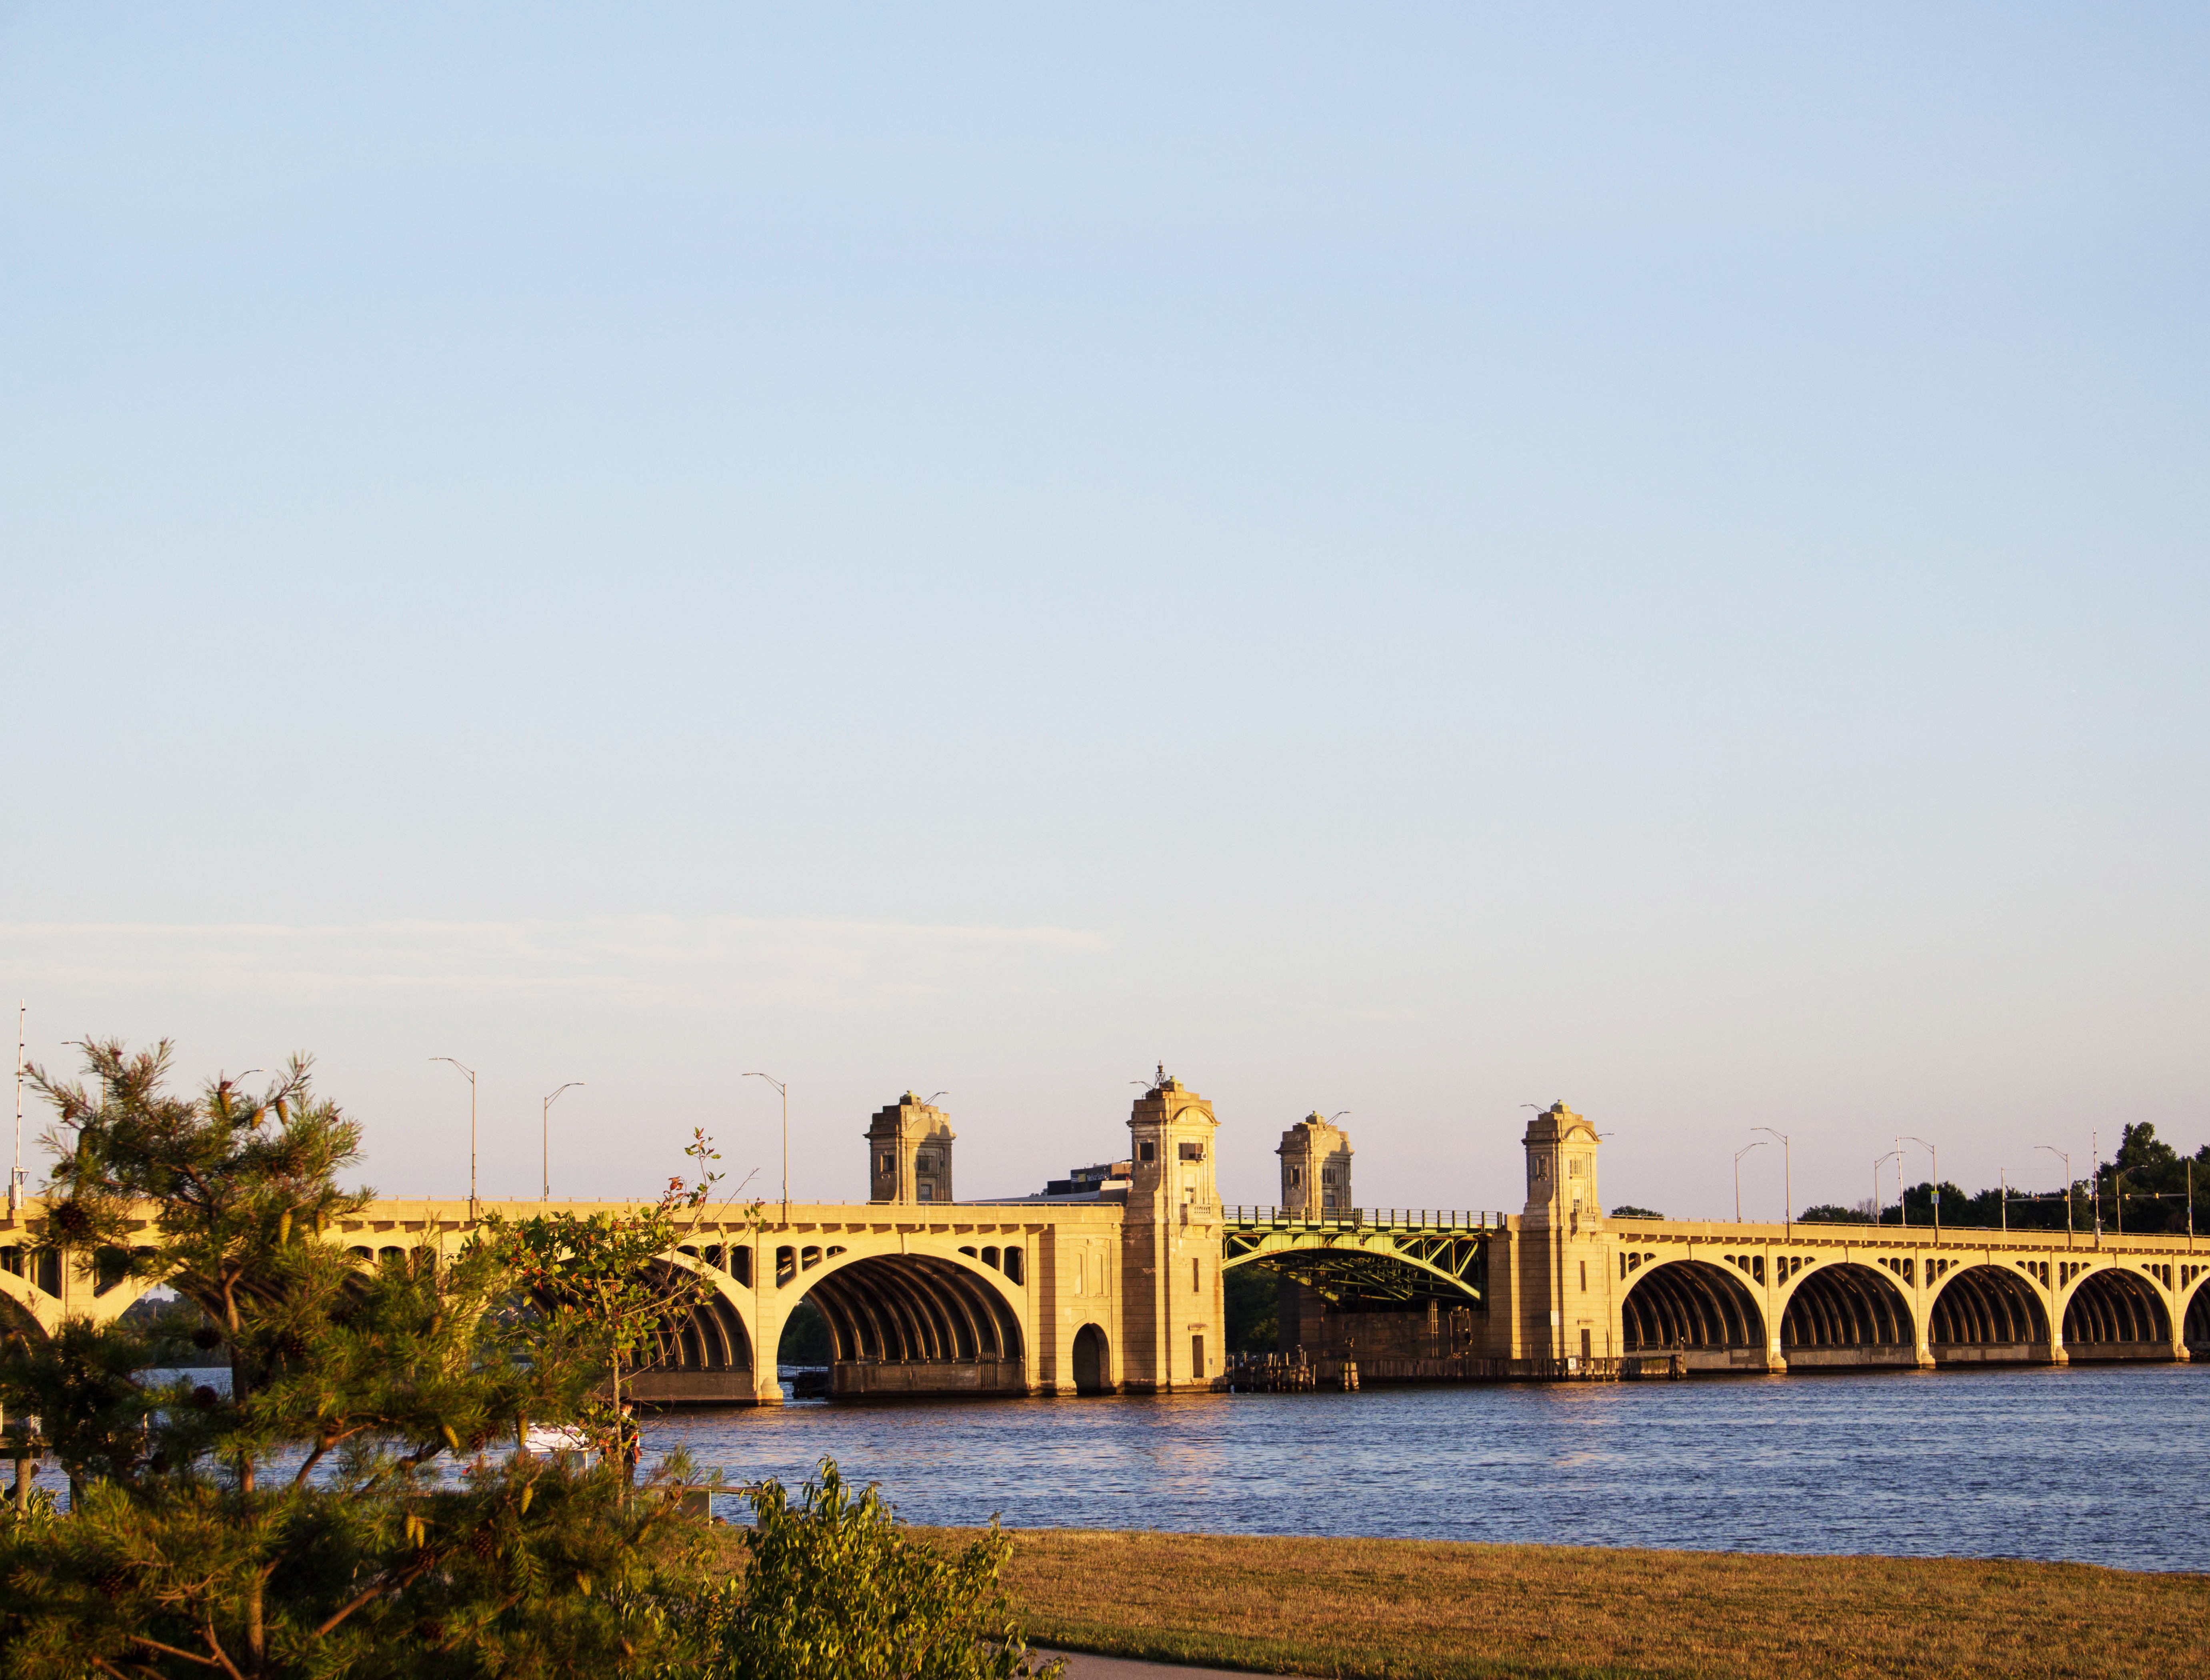 View of the Hanover Street/Vietnam Veterans Memorial Bridge. There are no clouds in the sky and the sun is setting with warm light on the bridge and water.